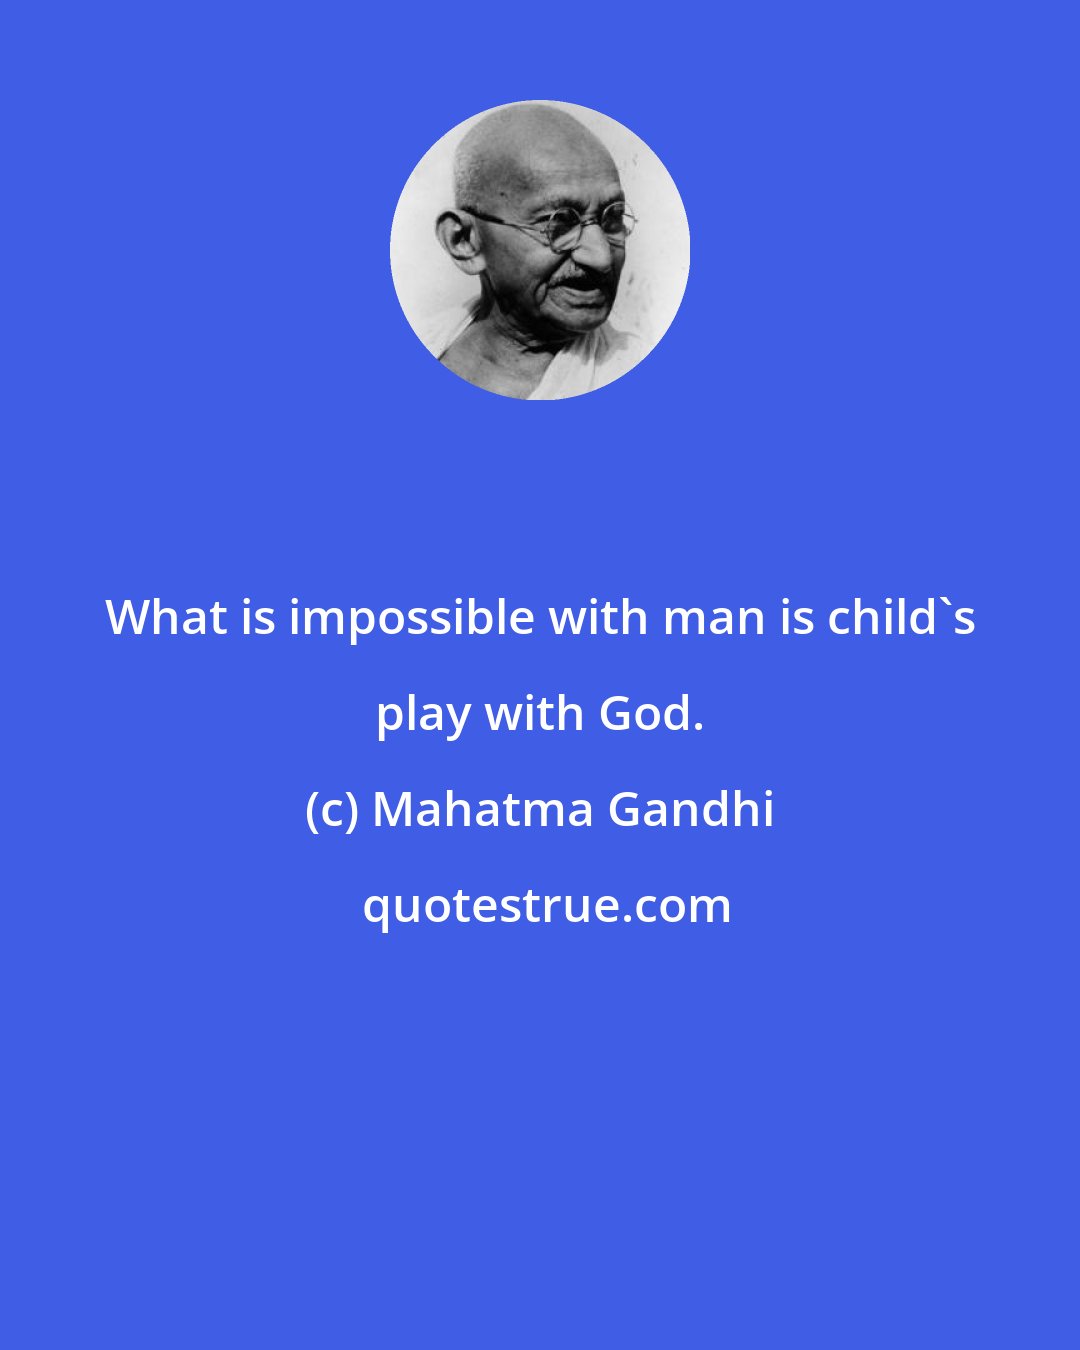 Mahatma Gandhi: What is impossible with man is child's play with God.